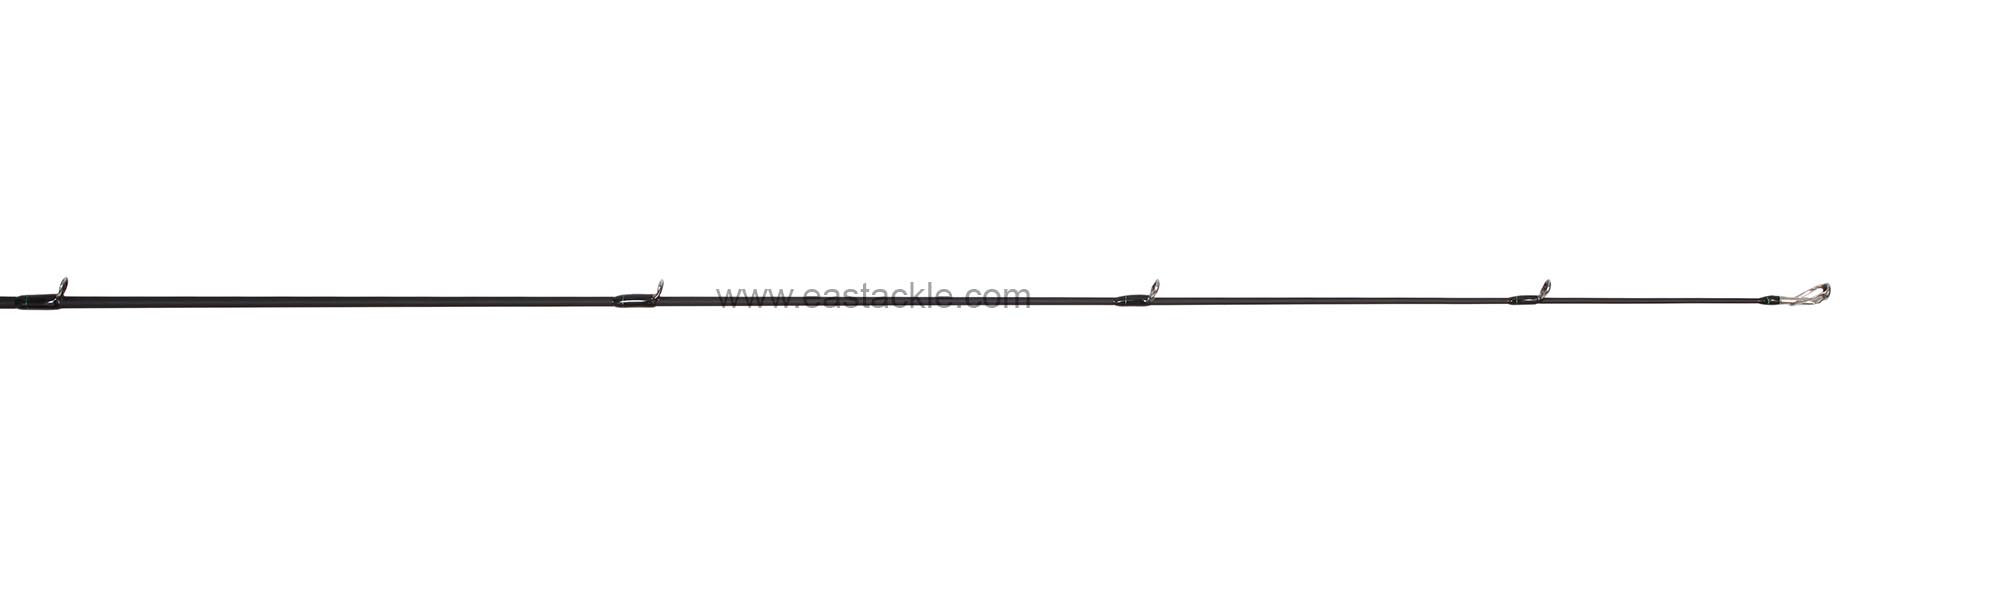 Rapala - Koivu - KVC651L - Bait Casting Rod - Tip Section (Side View) | Eastackle